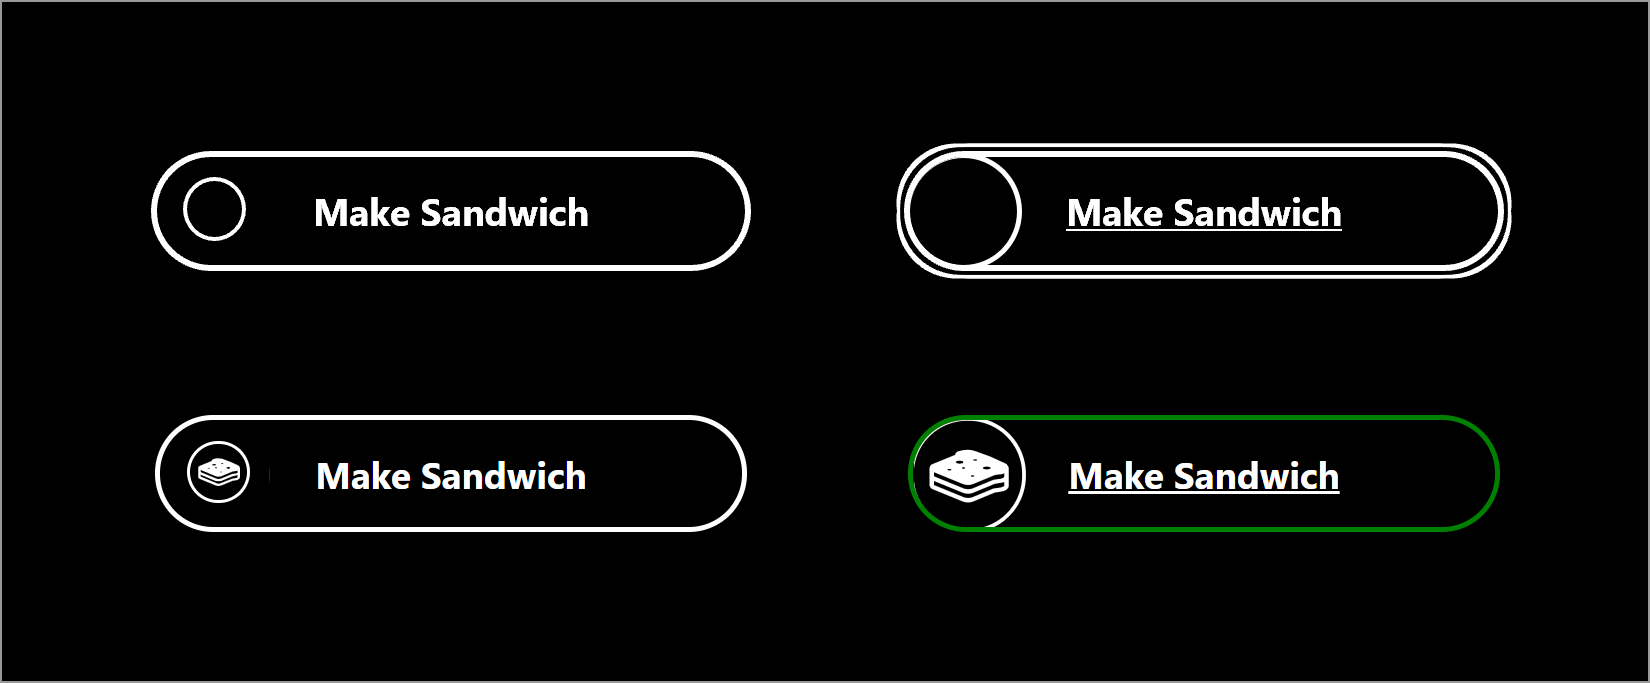 4 versions of the same button, all with a black background and monochromatic styles.